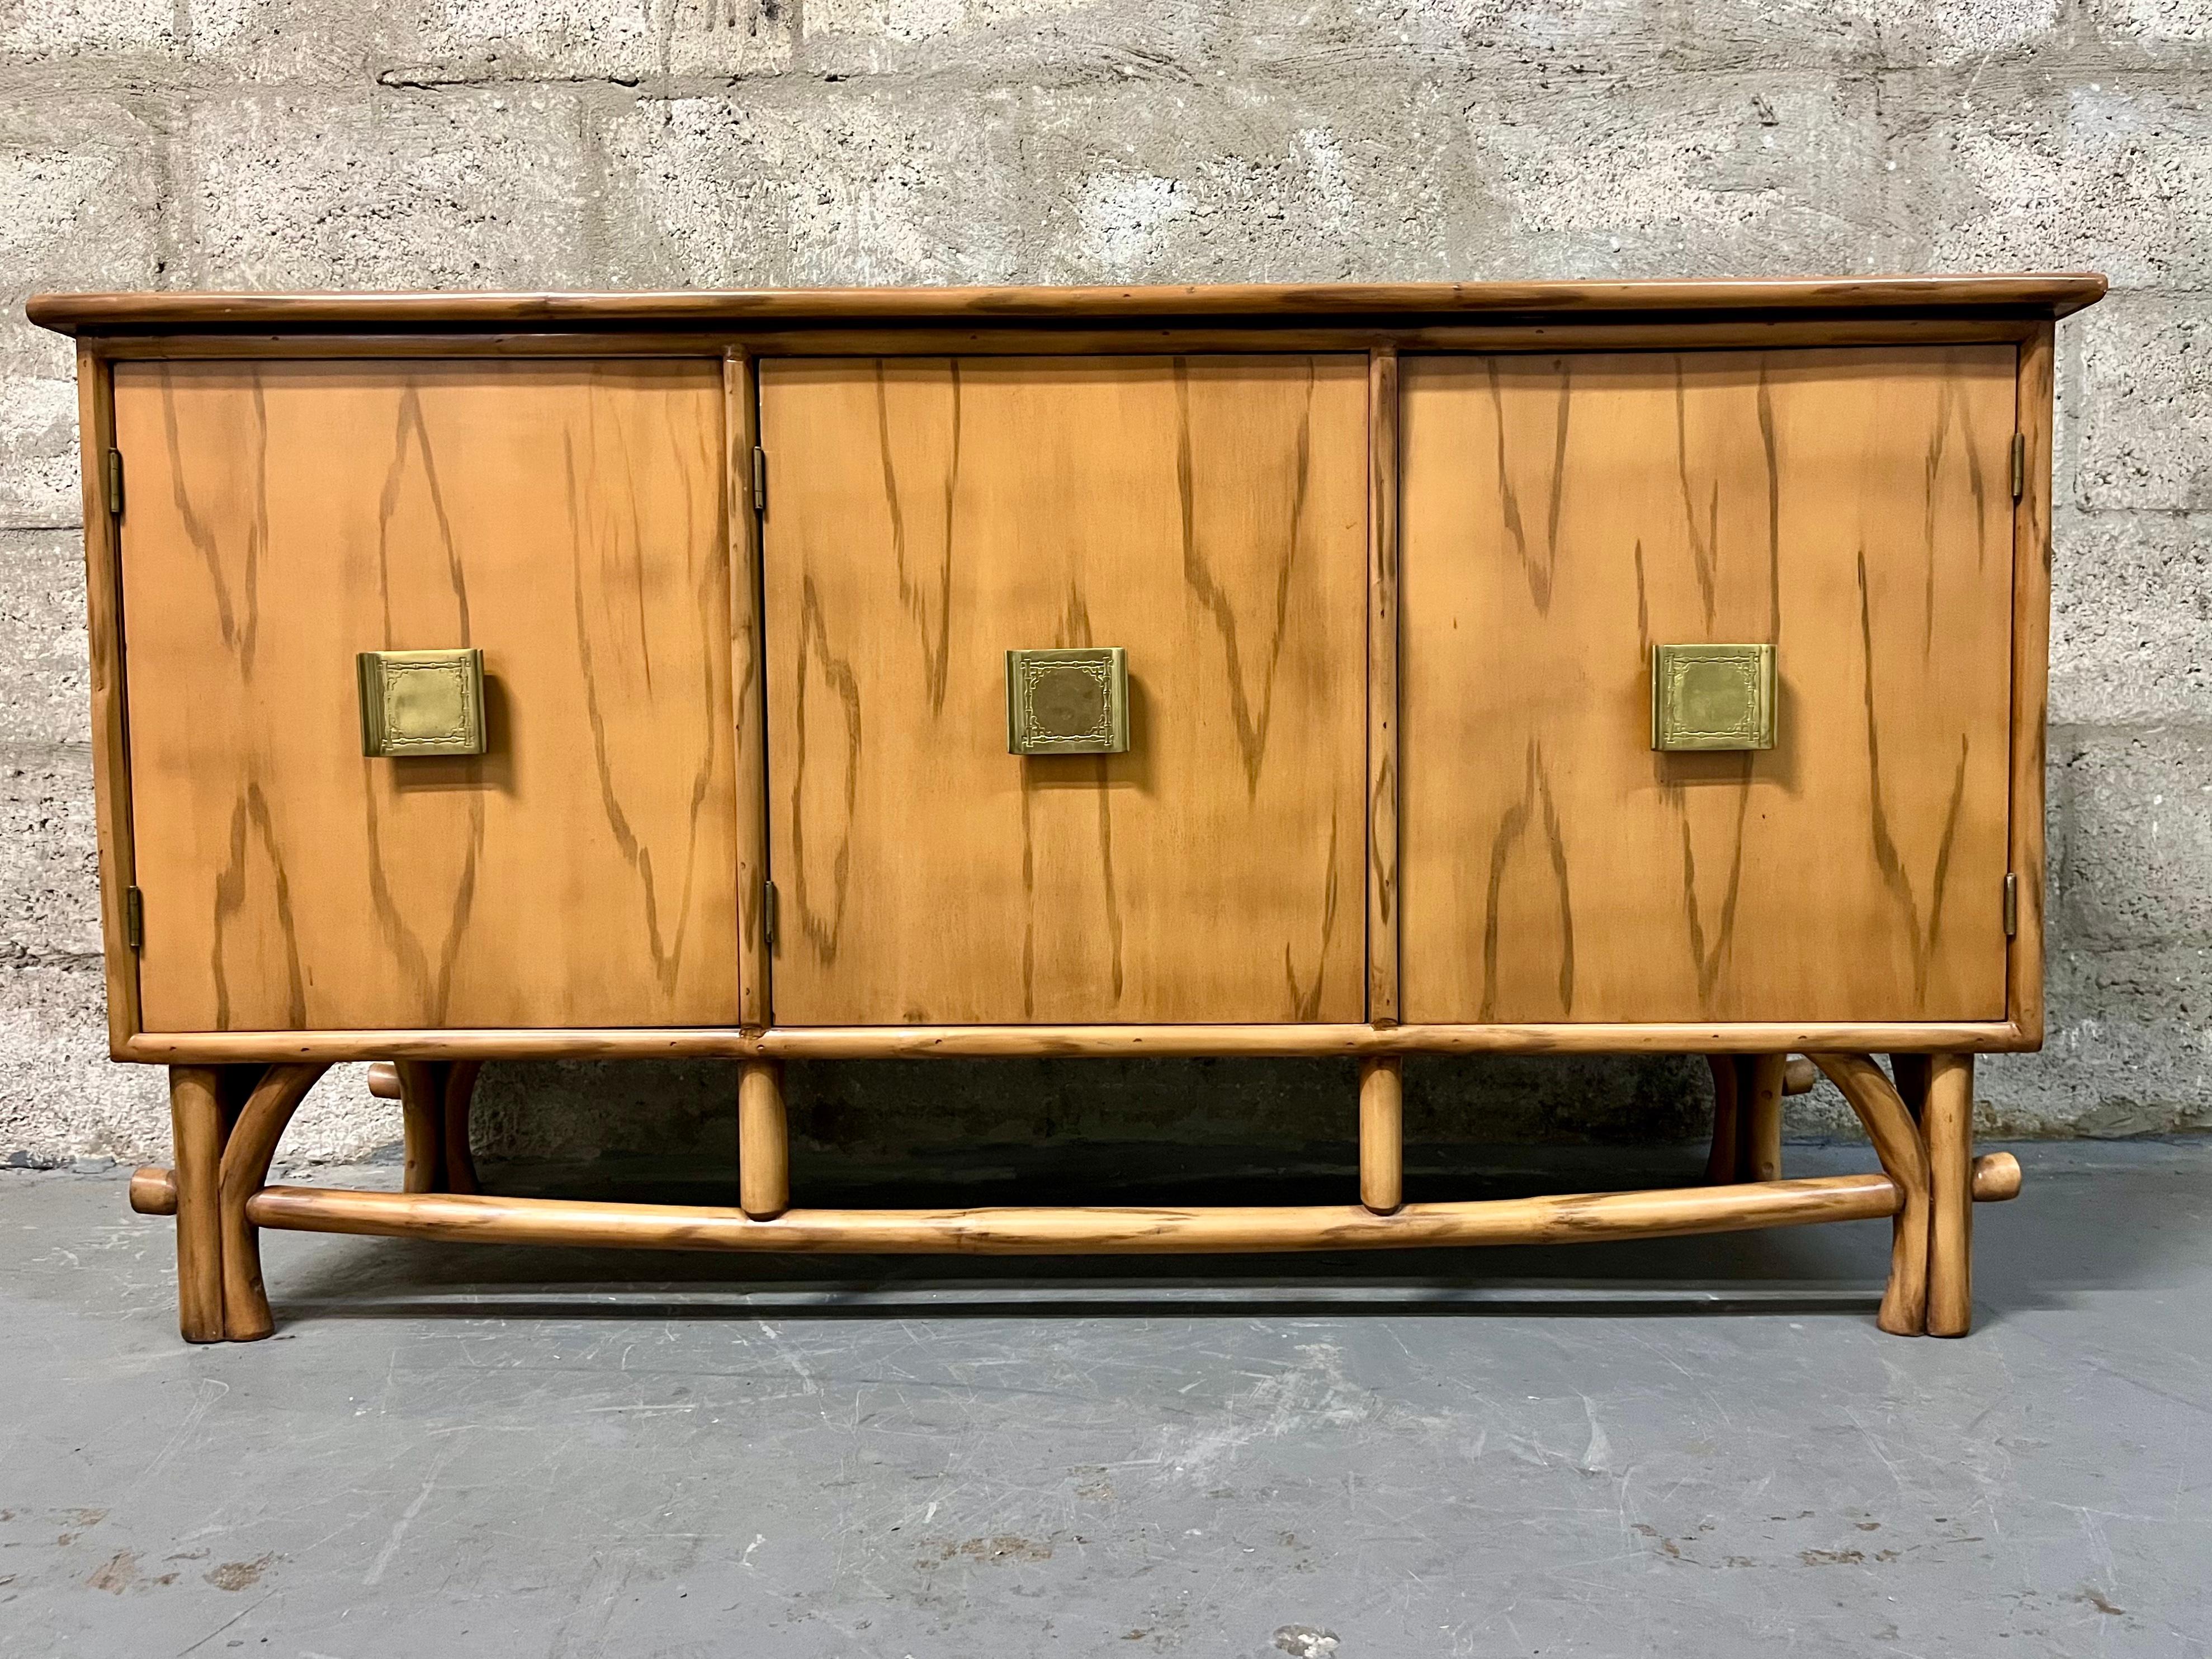 Mid Century Modern Chinoiserie Inspired Rattan Buffet / Sideboard in the Adrien Audoux & Frida Minet Style. C 1960s.
Features a compact size that will work in any small area or room, a faux wood grain finish with rattan legs, a faux marble stucco